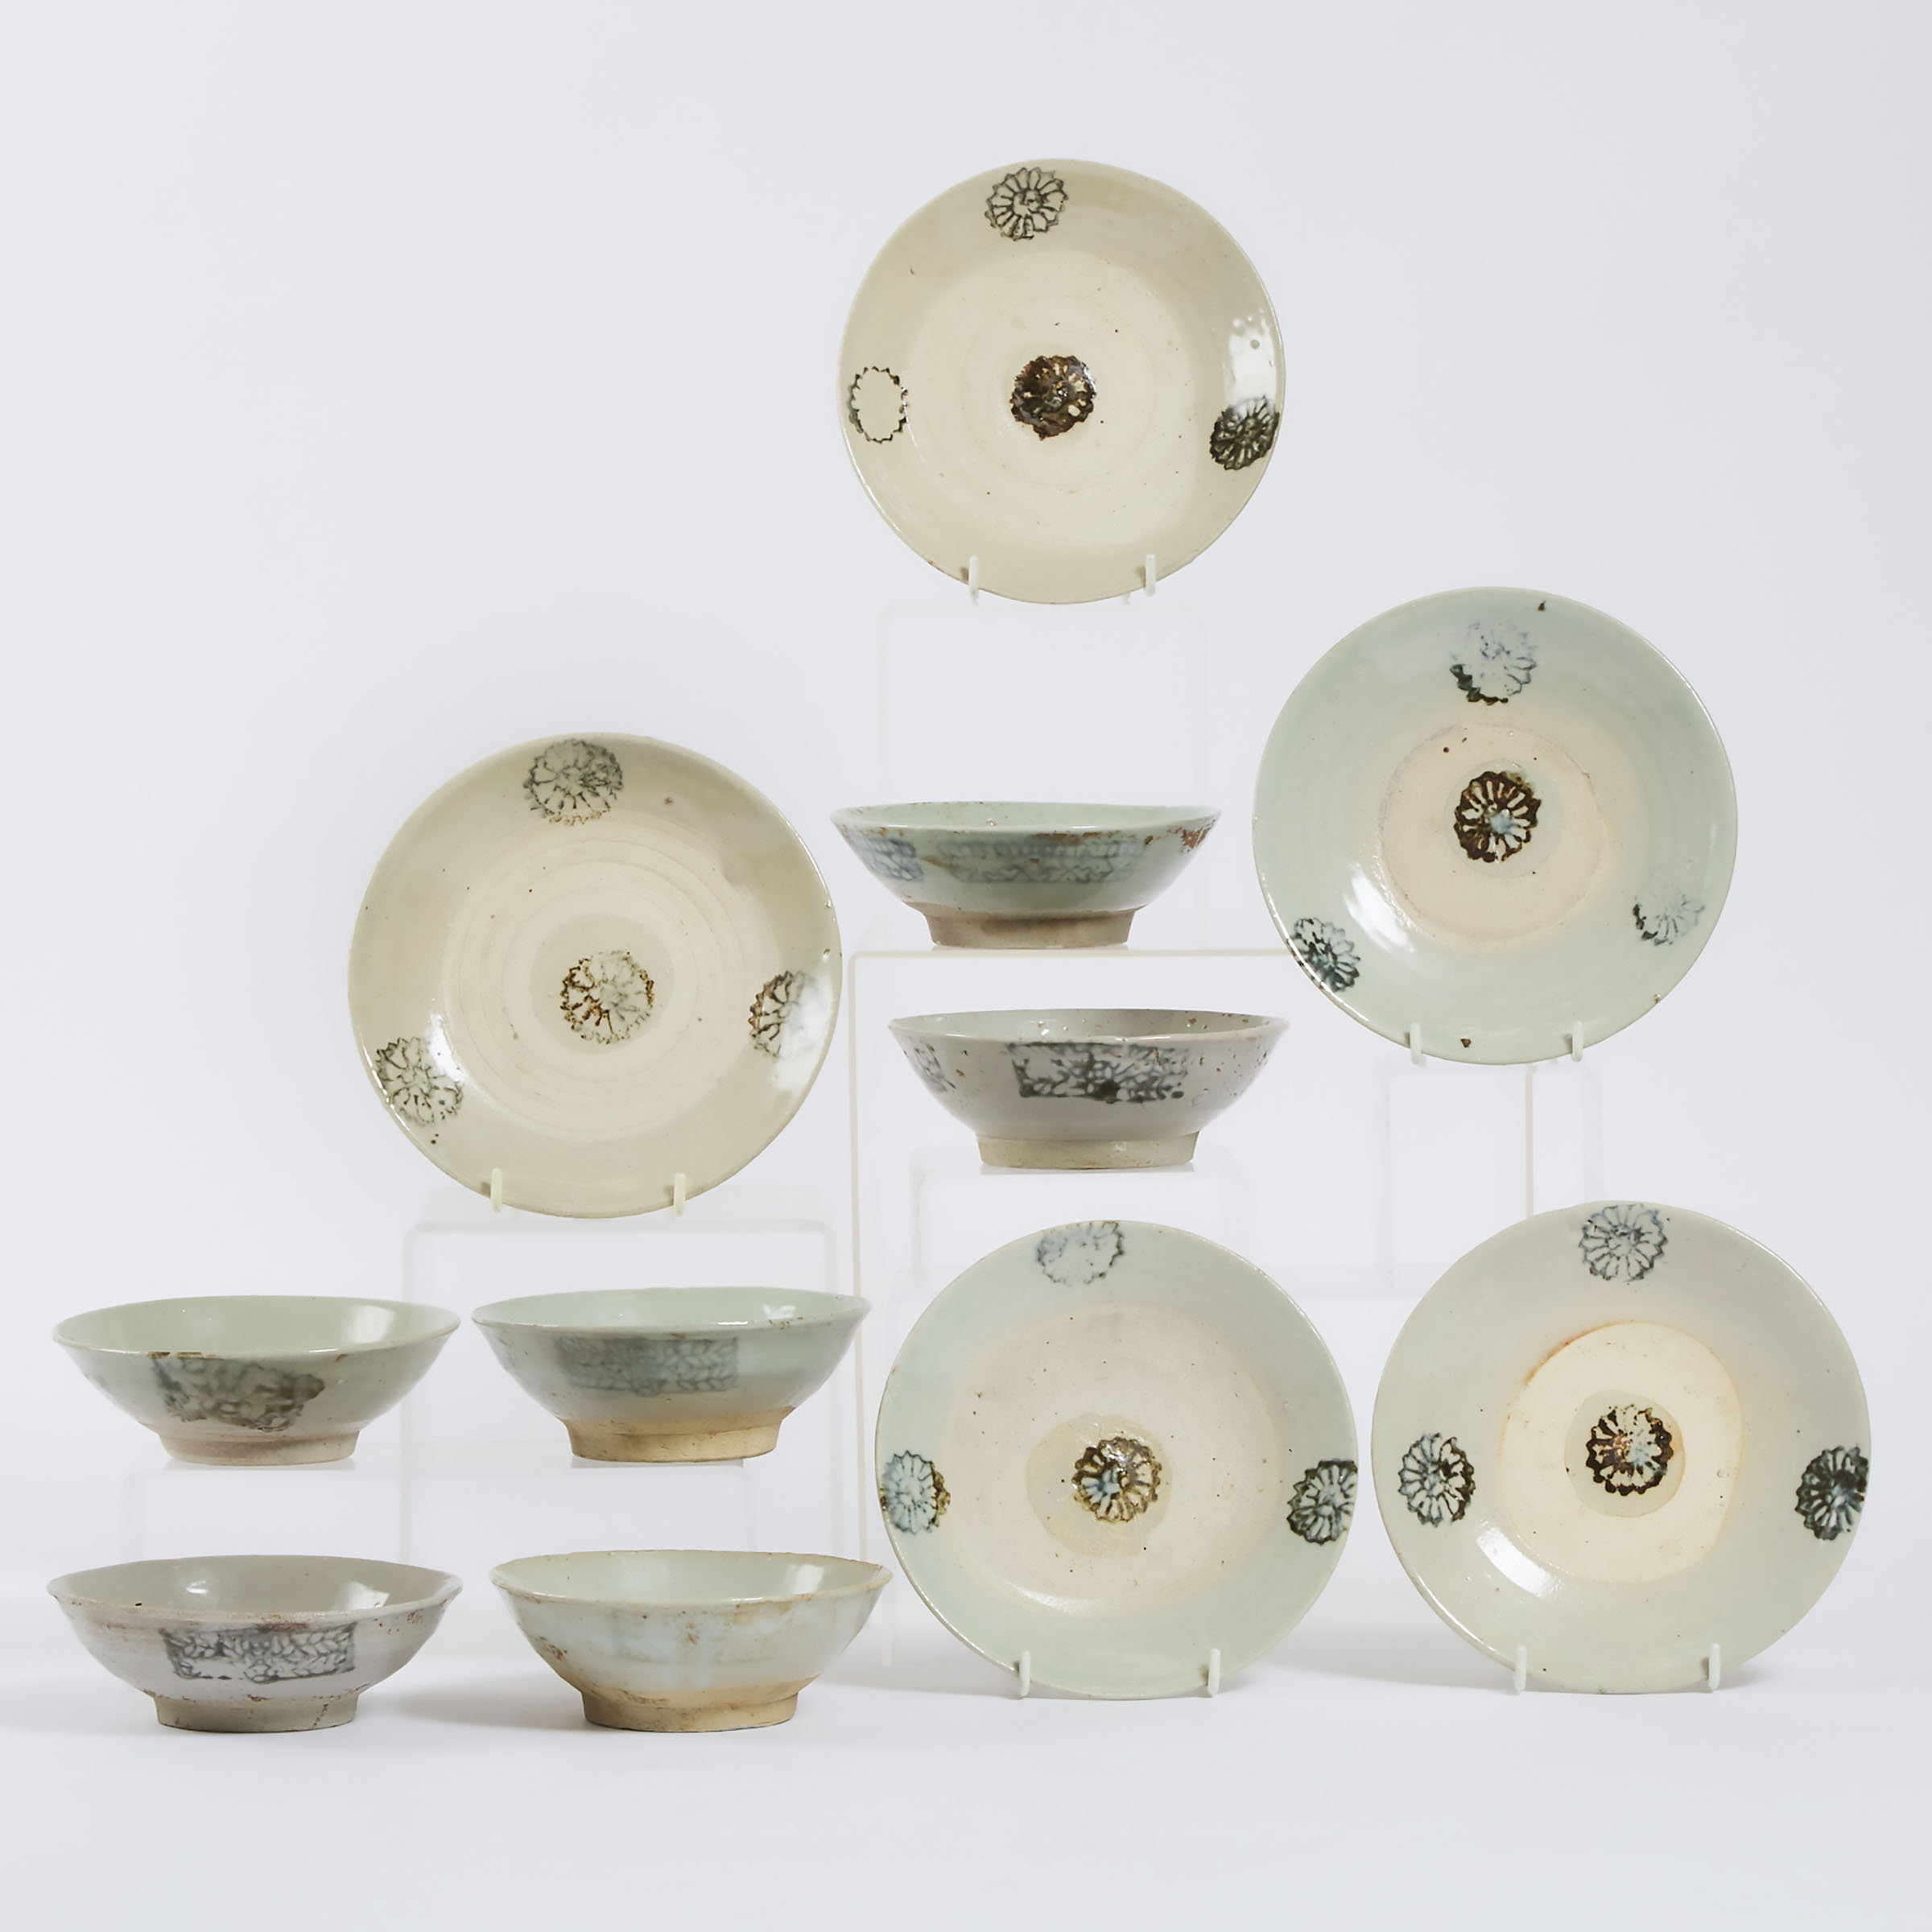 A Group of Eleven Swatow Blue and White Bowls and Dishes, 17th Century